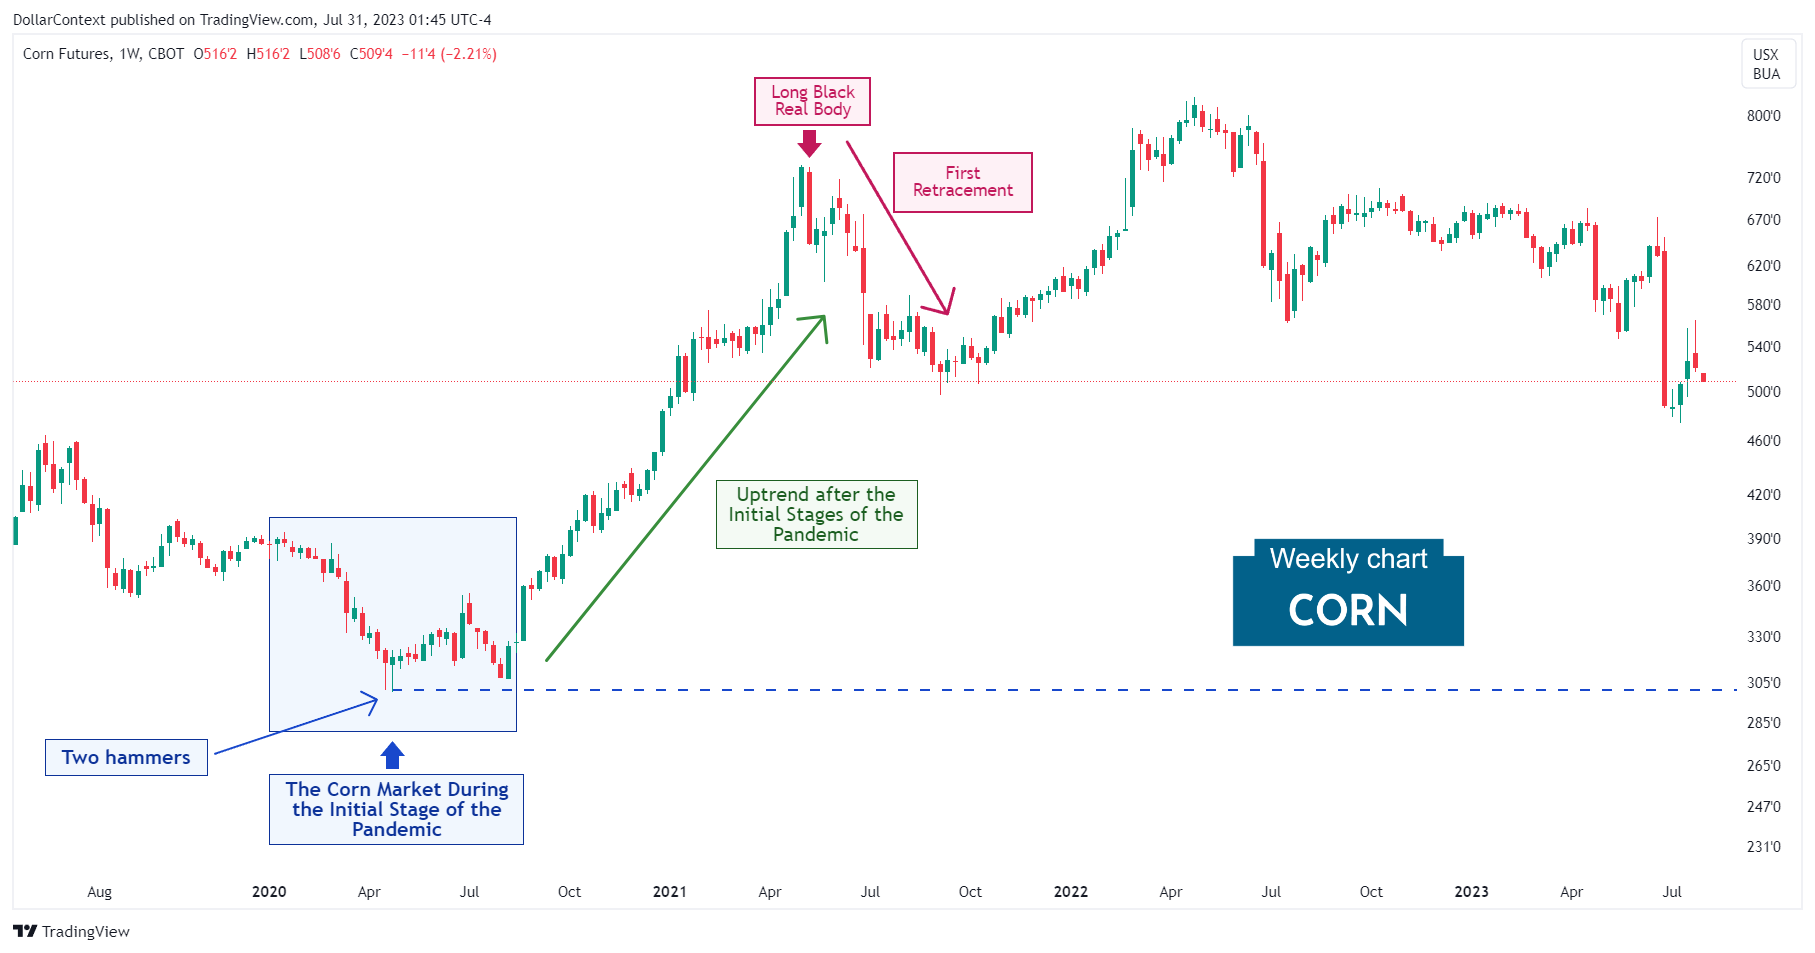 Corn Futures: The Correction from May to August 2021